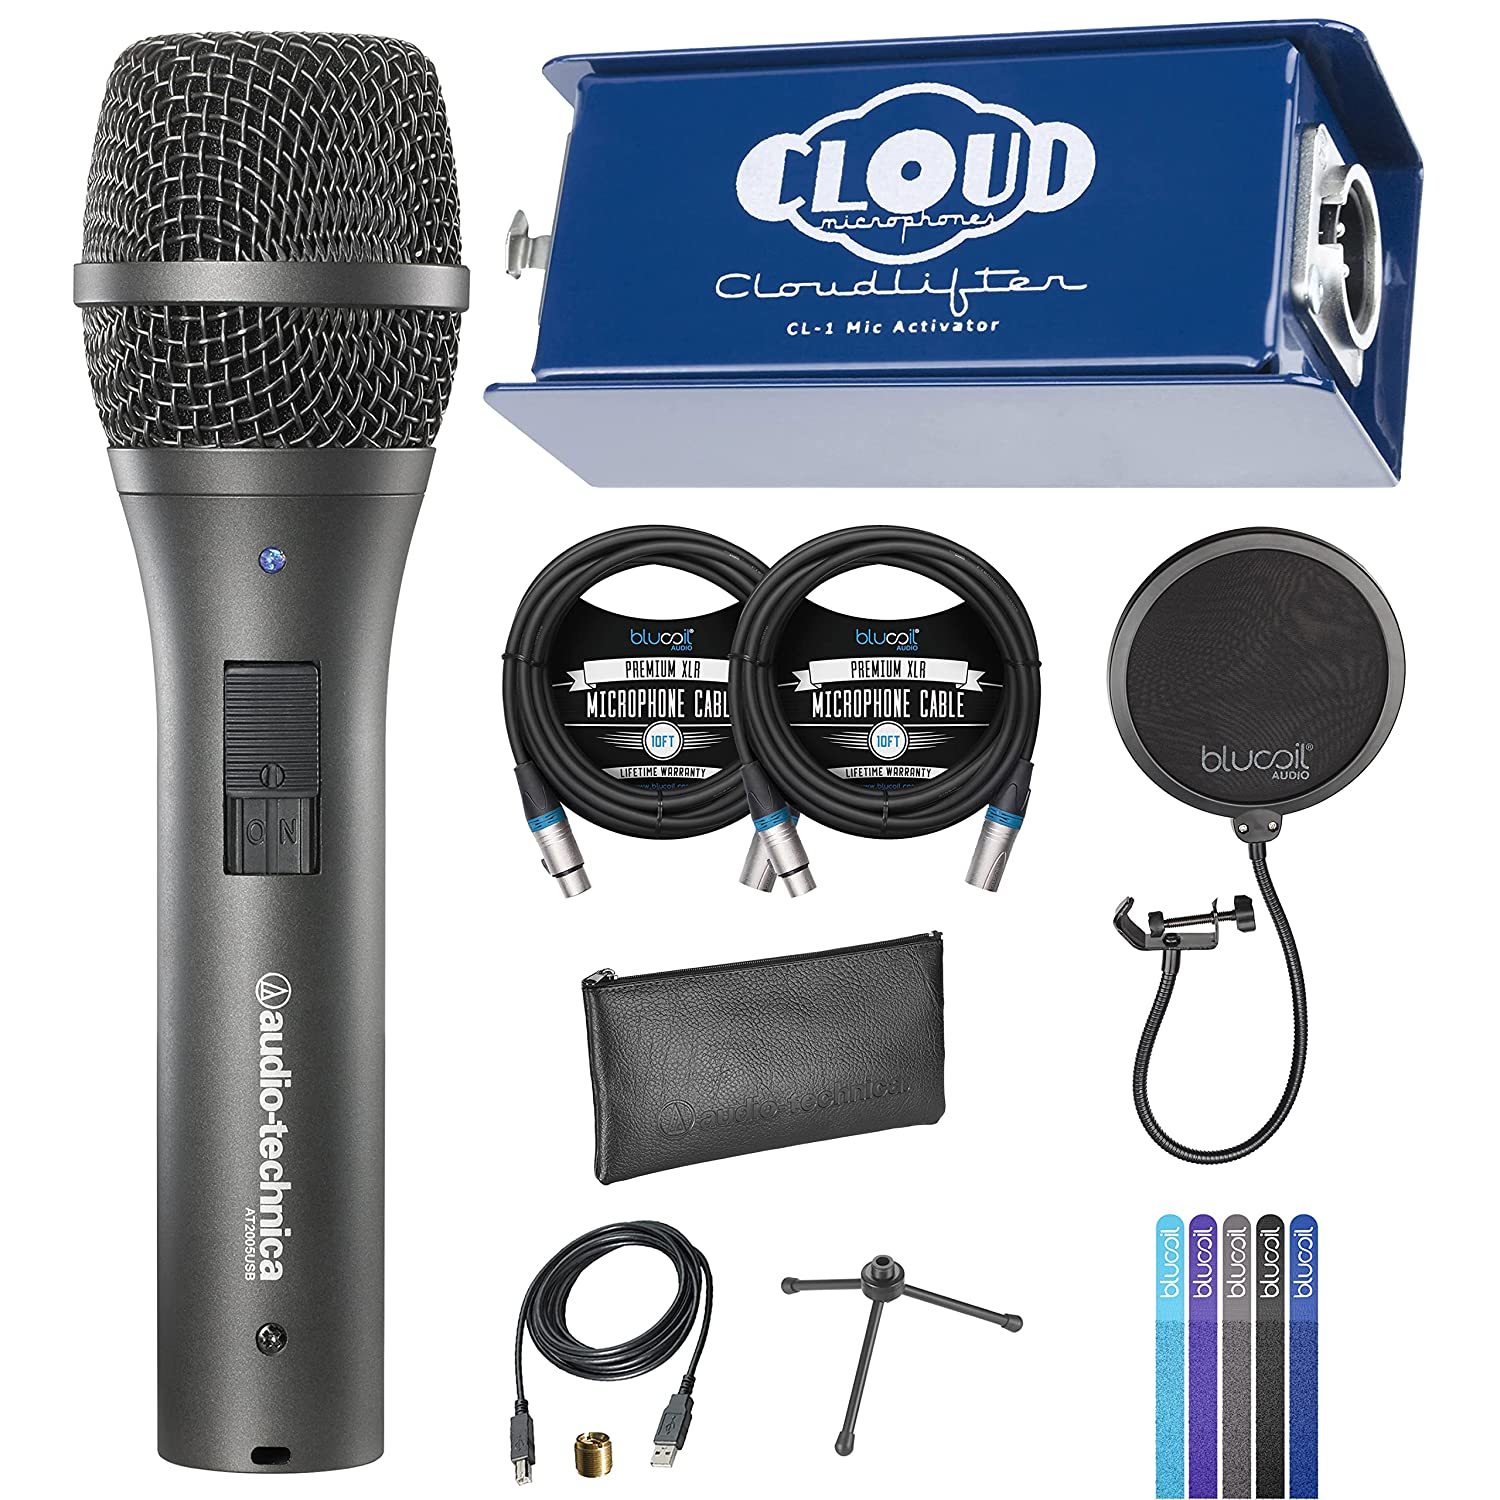 Cloud Microphones Cloudlifter CL-1 Mic Activator Bundle with Audio Technica AT20